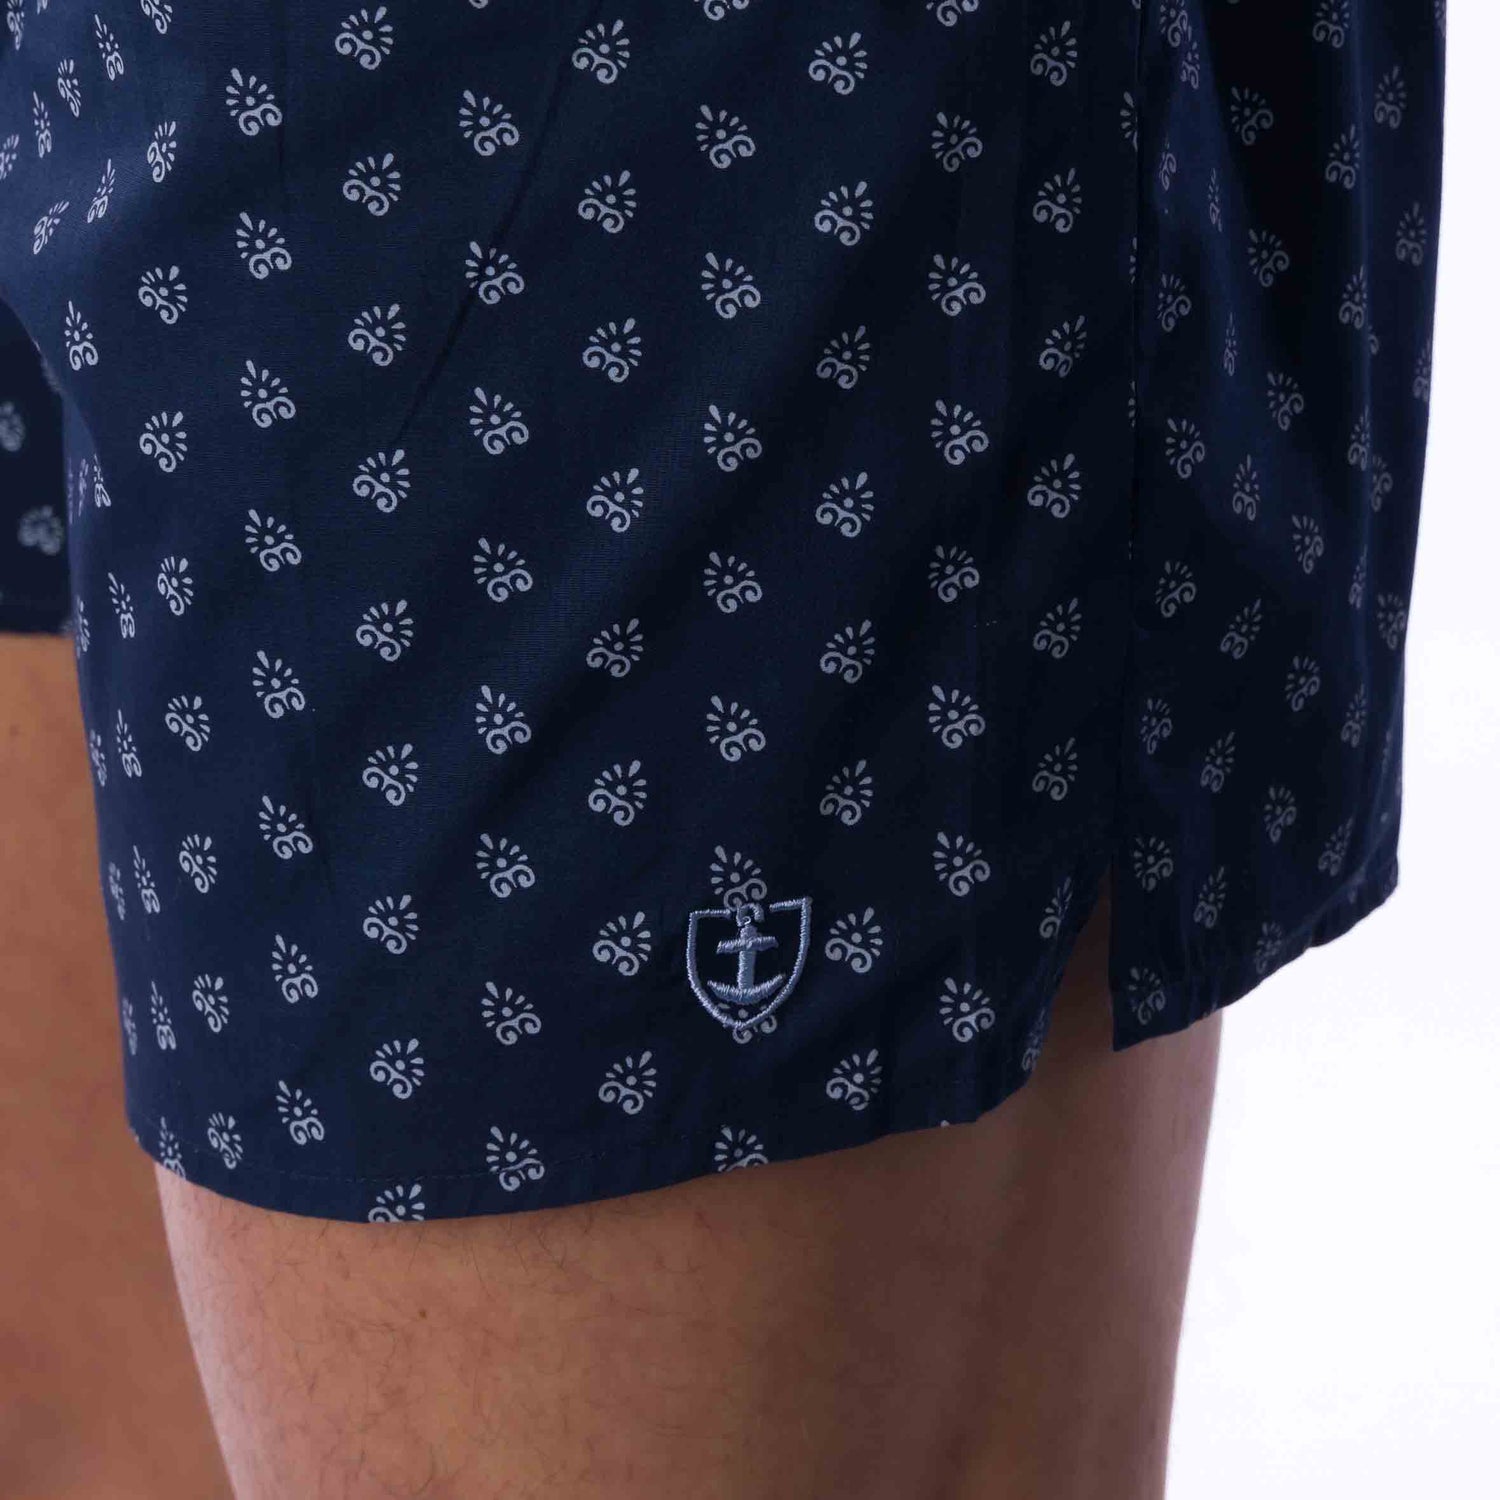 Pack of 2 Navy Blue Pure Cotton Poplin Boxer Shorts